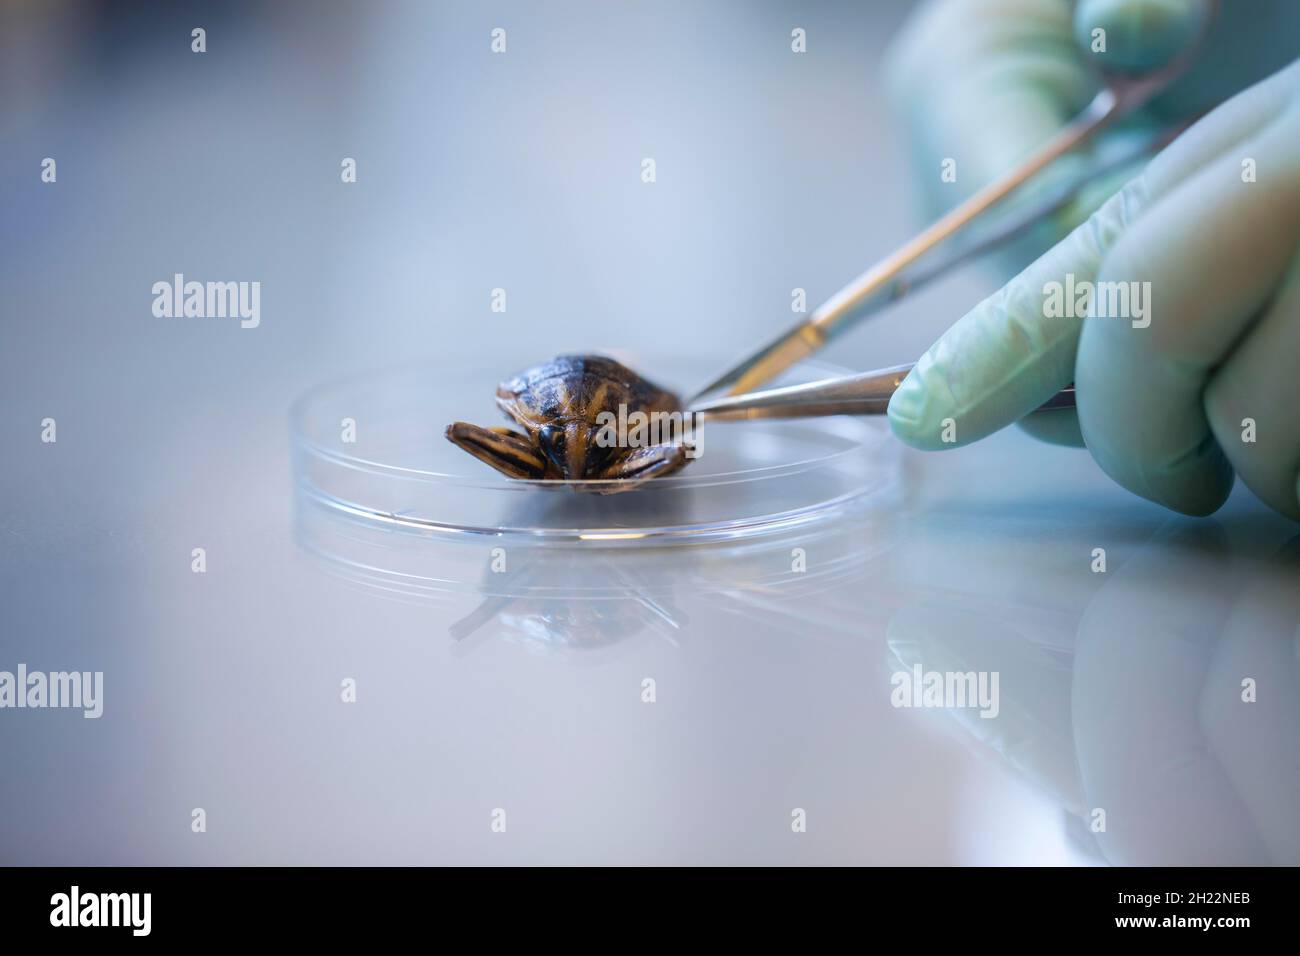 Bugs with petri dish and tweezers in a laboratory with hand and laboratory glove being prepared, food control, Freiburg, Baden-Wuerttemberg, Germany Stock Photo